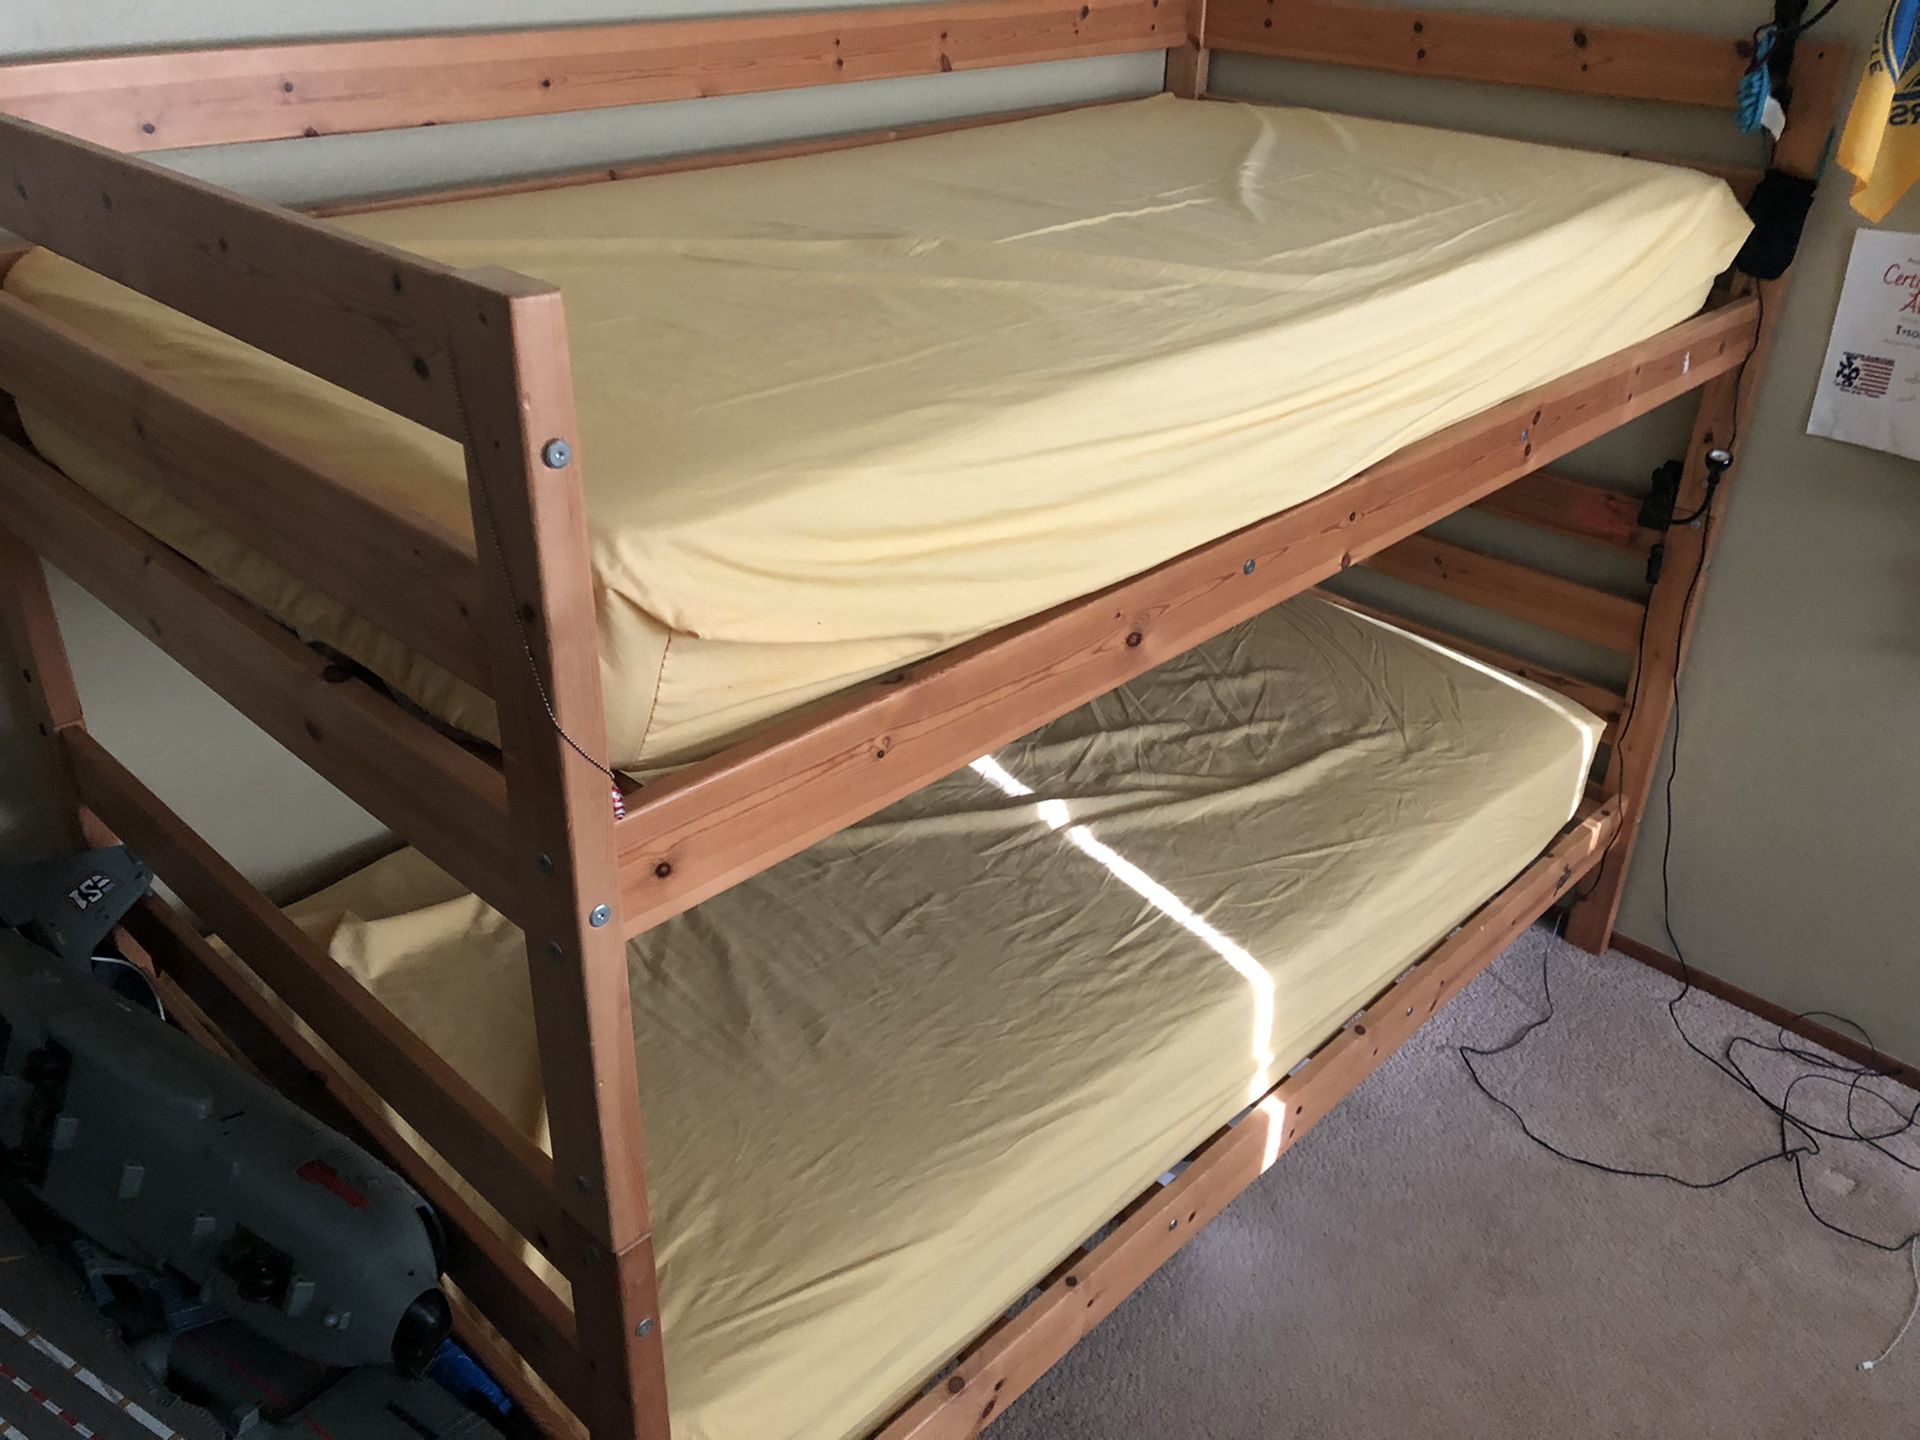 Bunk beds included mattresses